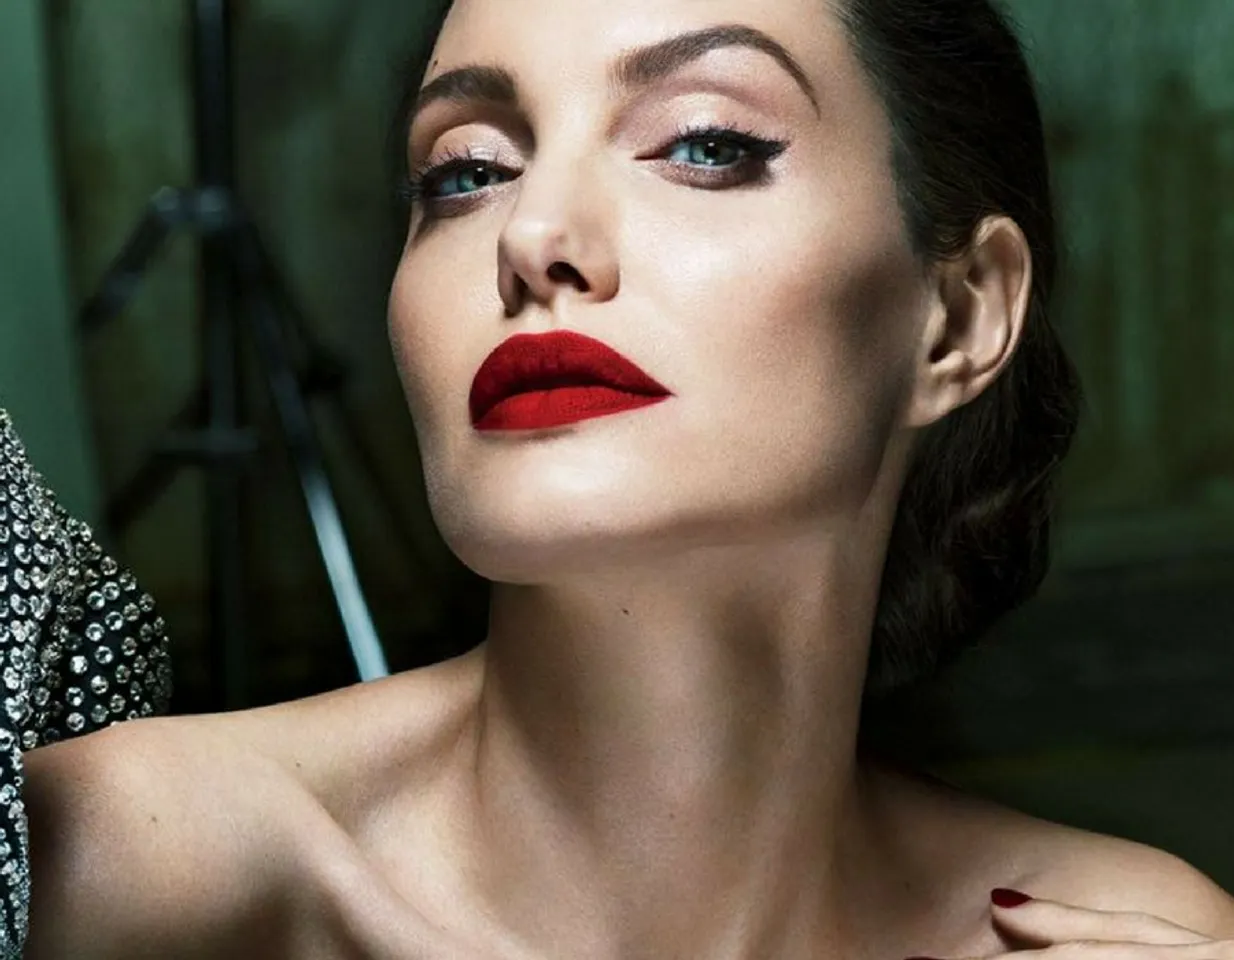 10 THINGS ABOUT ANGELINA JOLIE THAT INSPIRE US TO BE BETTER HUMANS